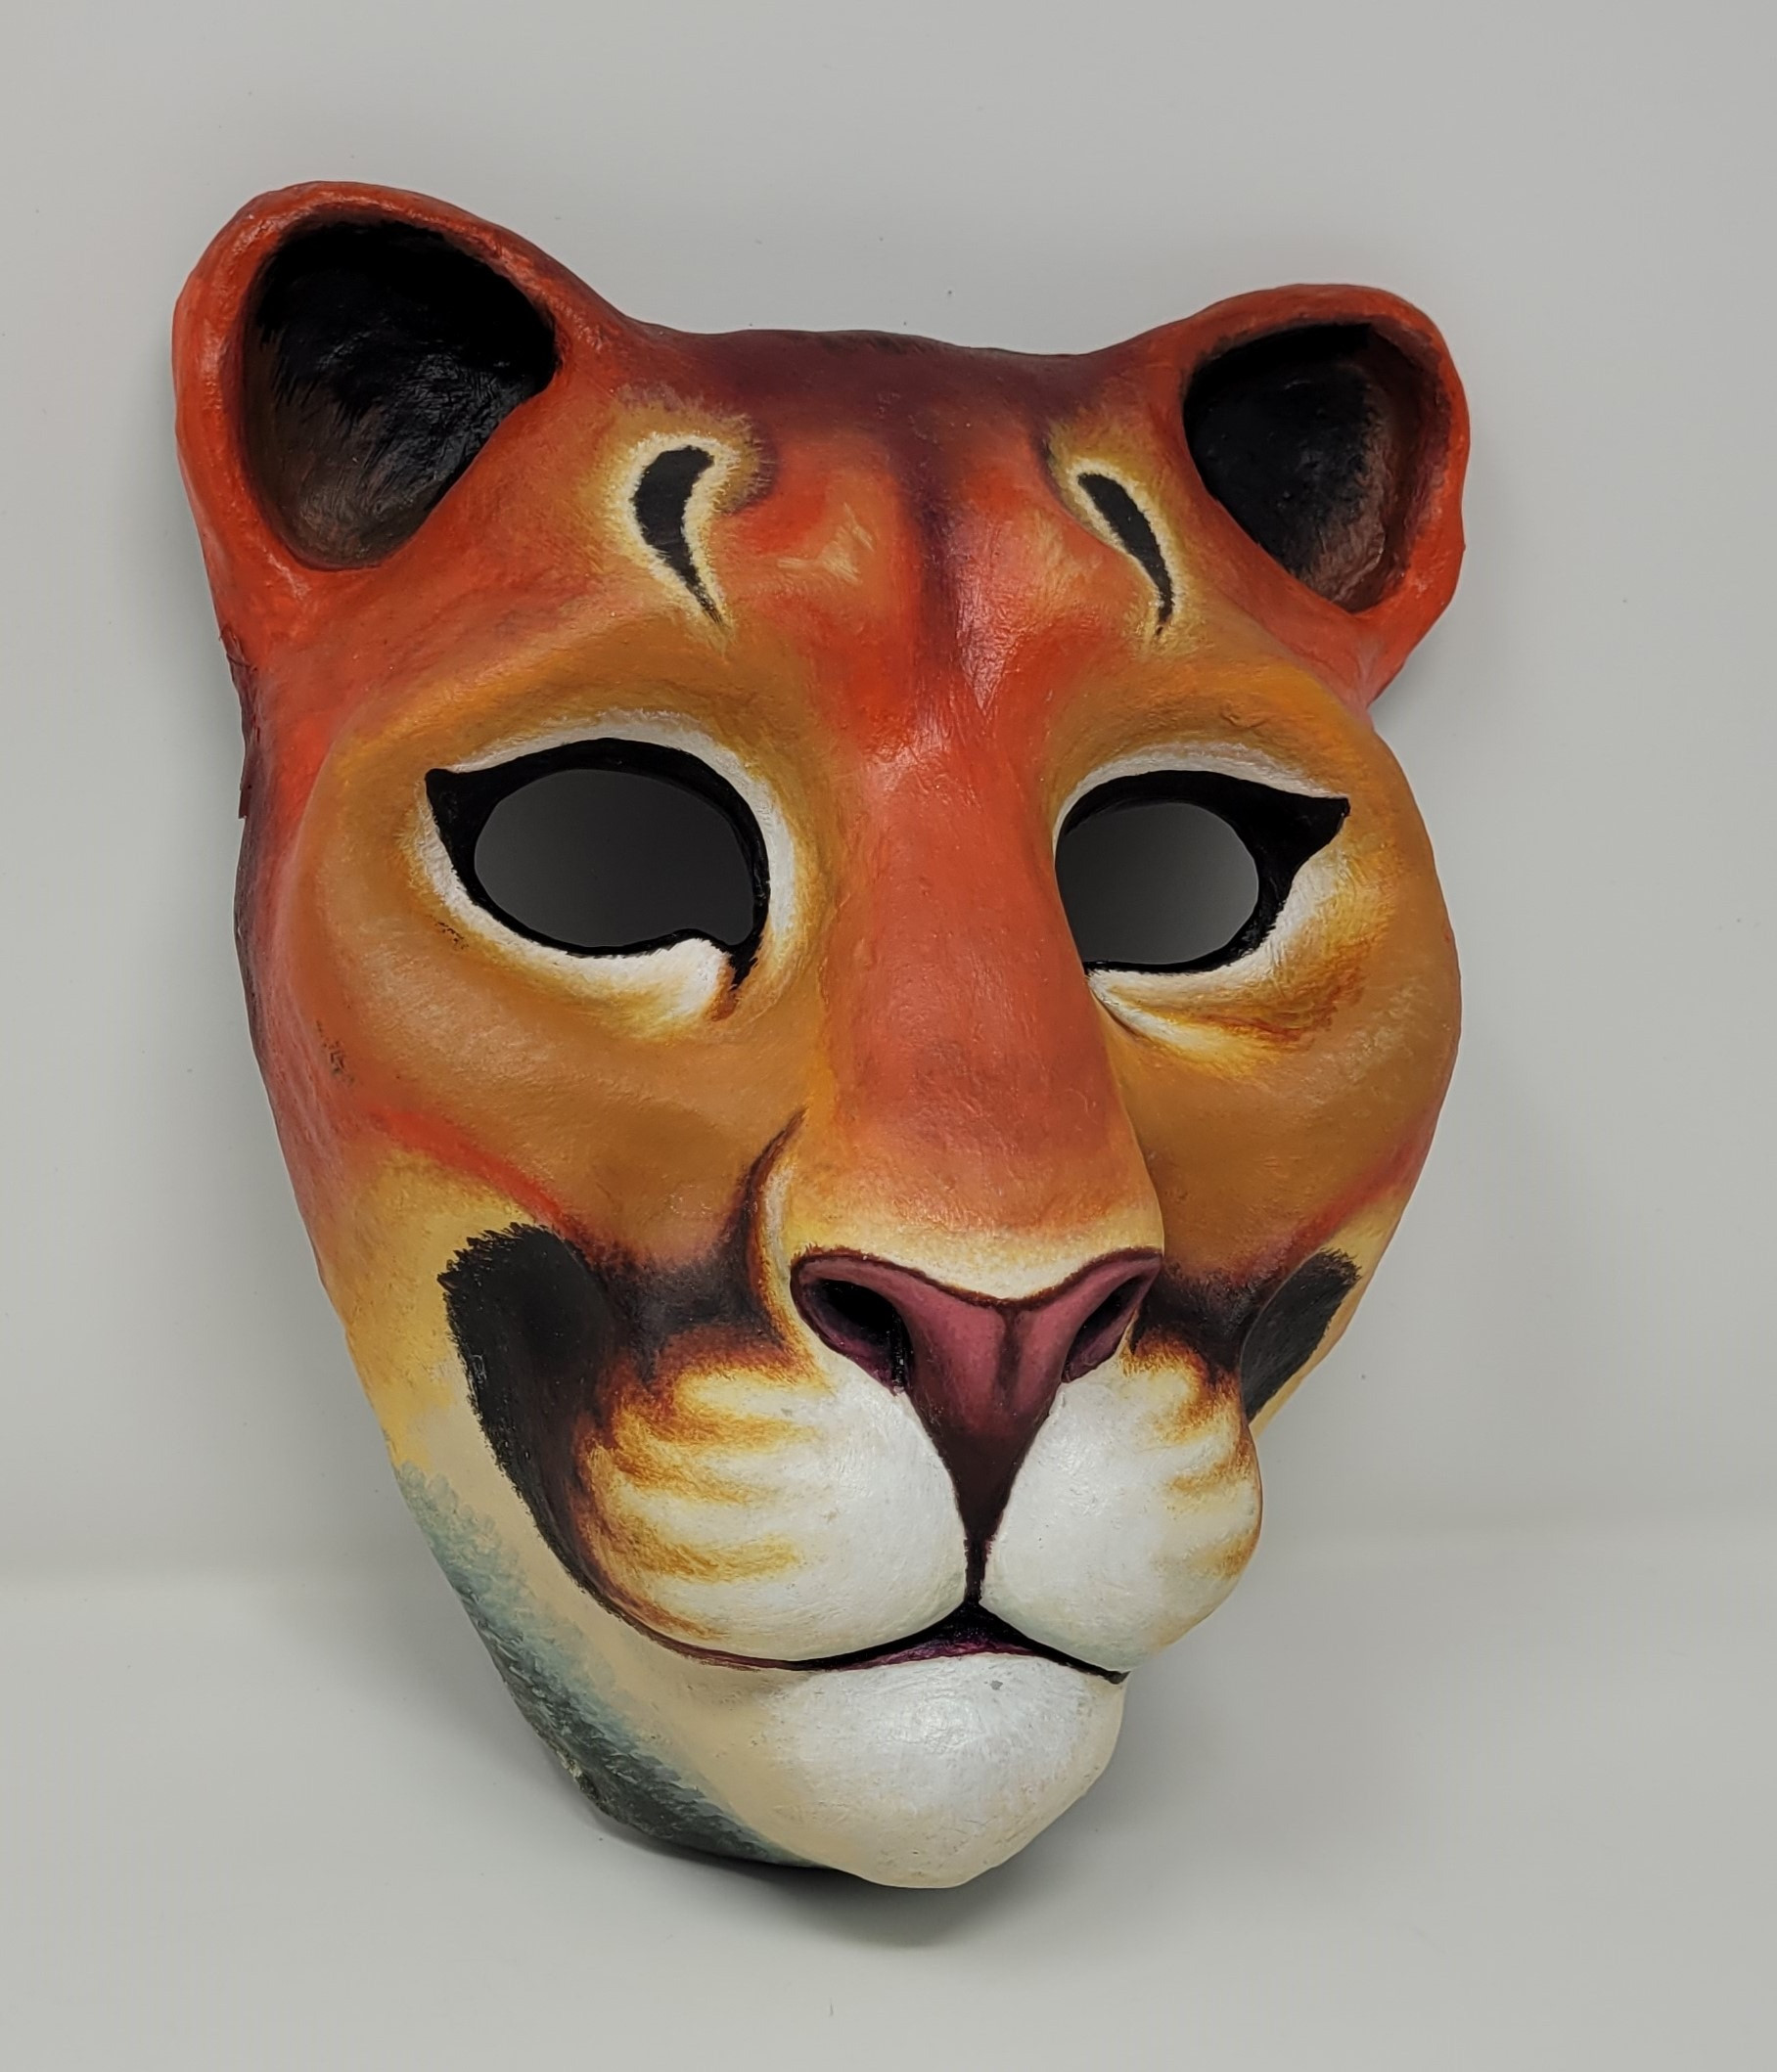 Handmade ceramic lion mask  by local artist, Katie Gelinas. This beauty has some weight to it and is even more gorgeous in person!